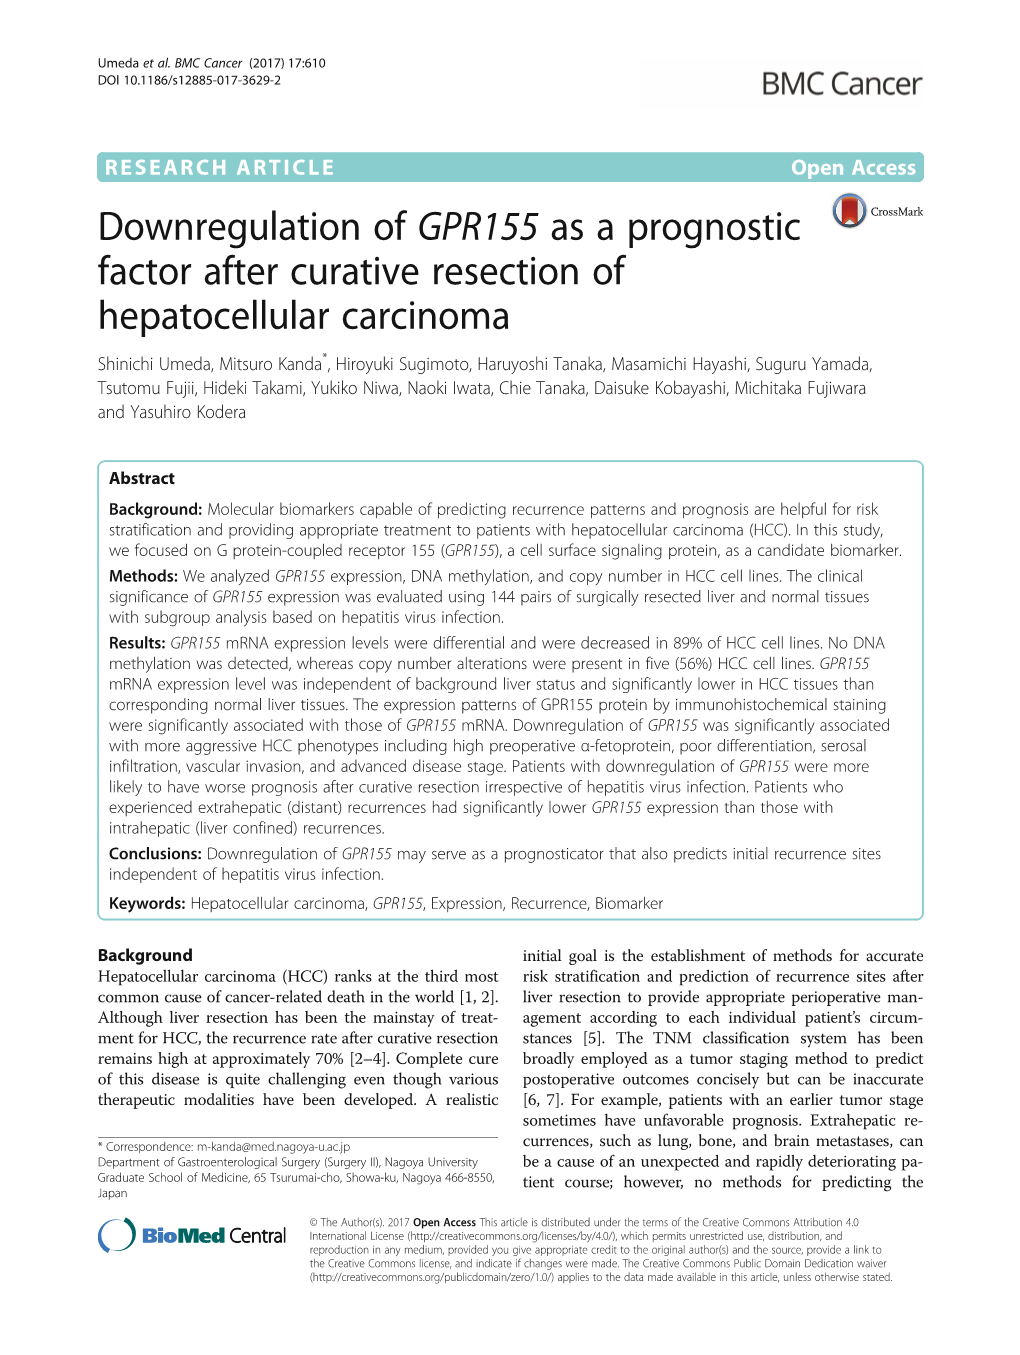 Downregulation of GPR155 As a Prognostic Factor After Curative